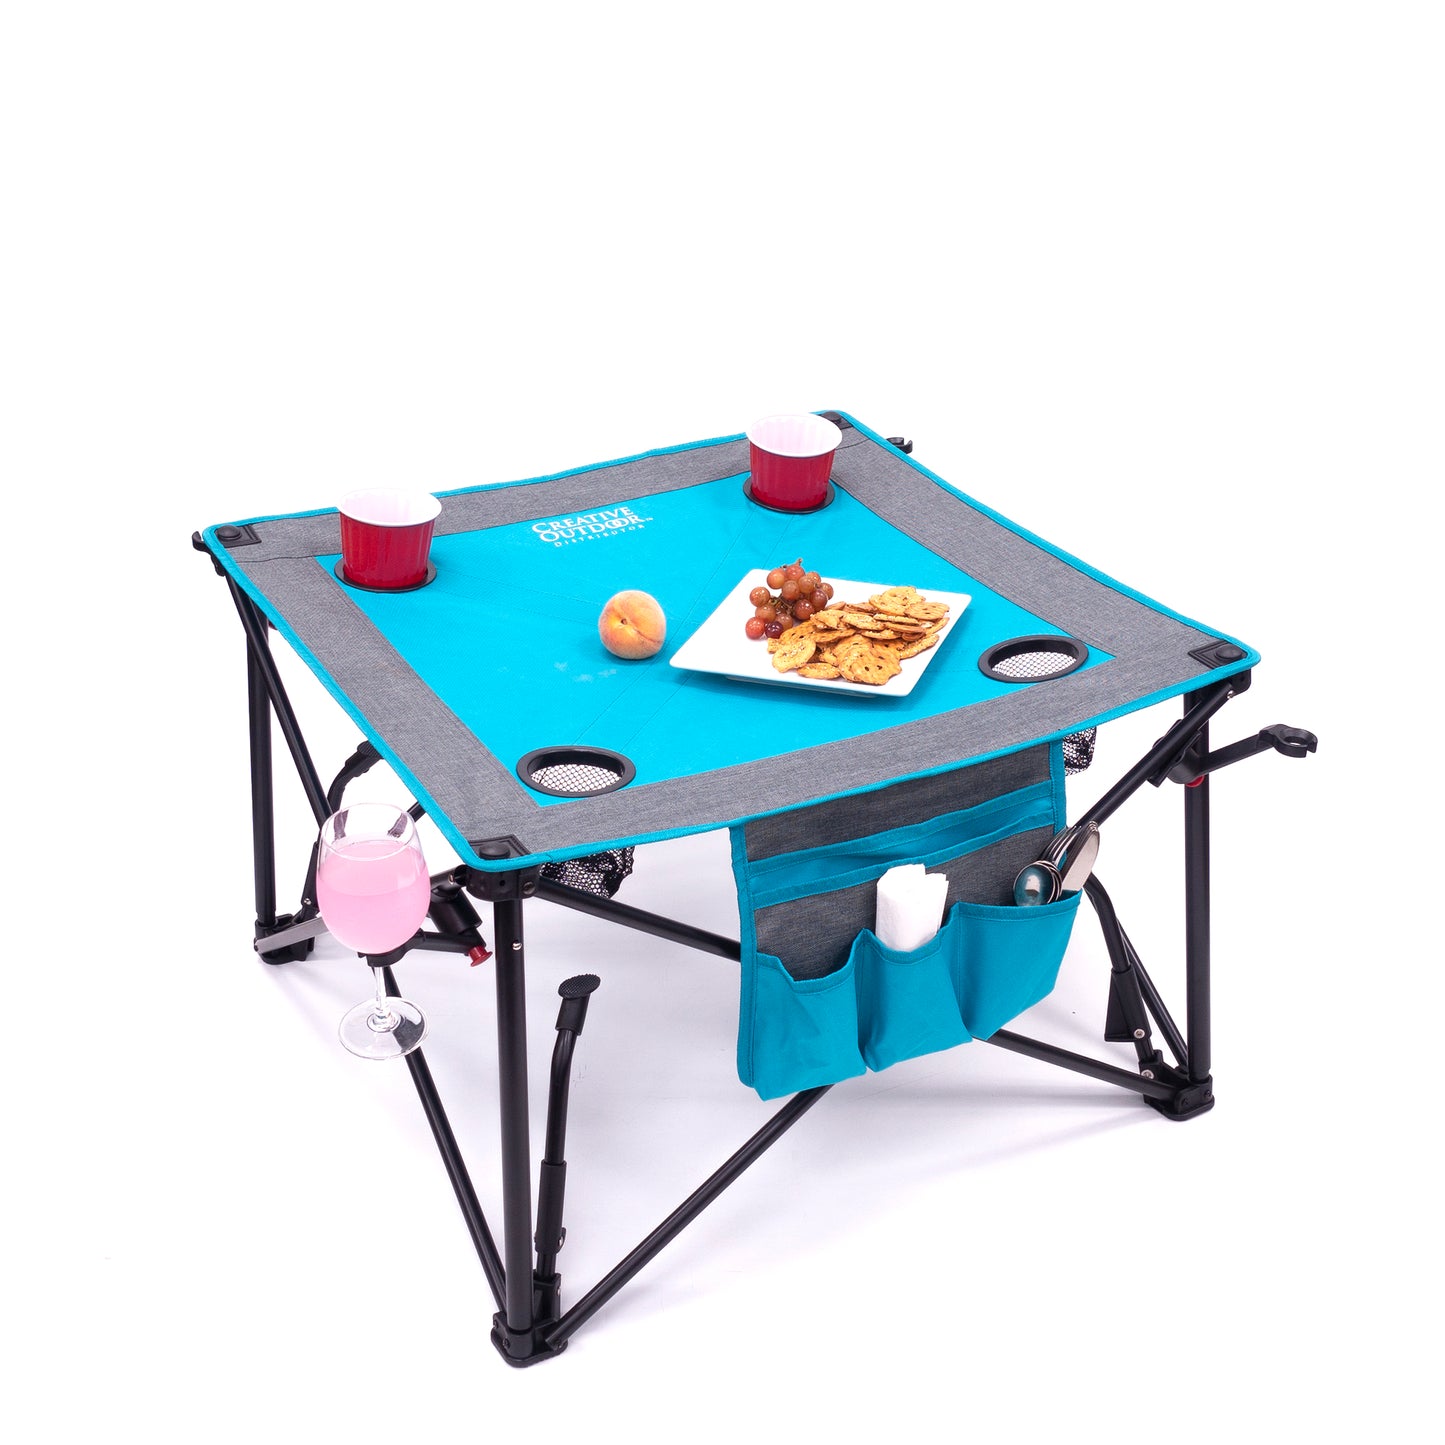 two-height-folding-wine-table-teal-gray